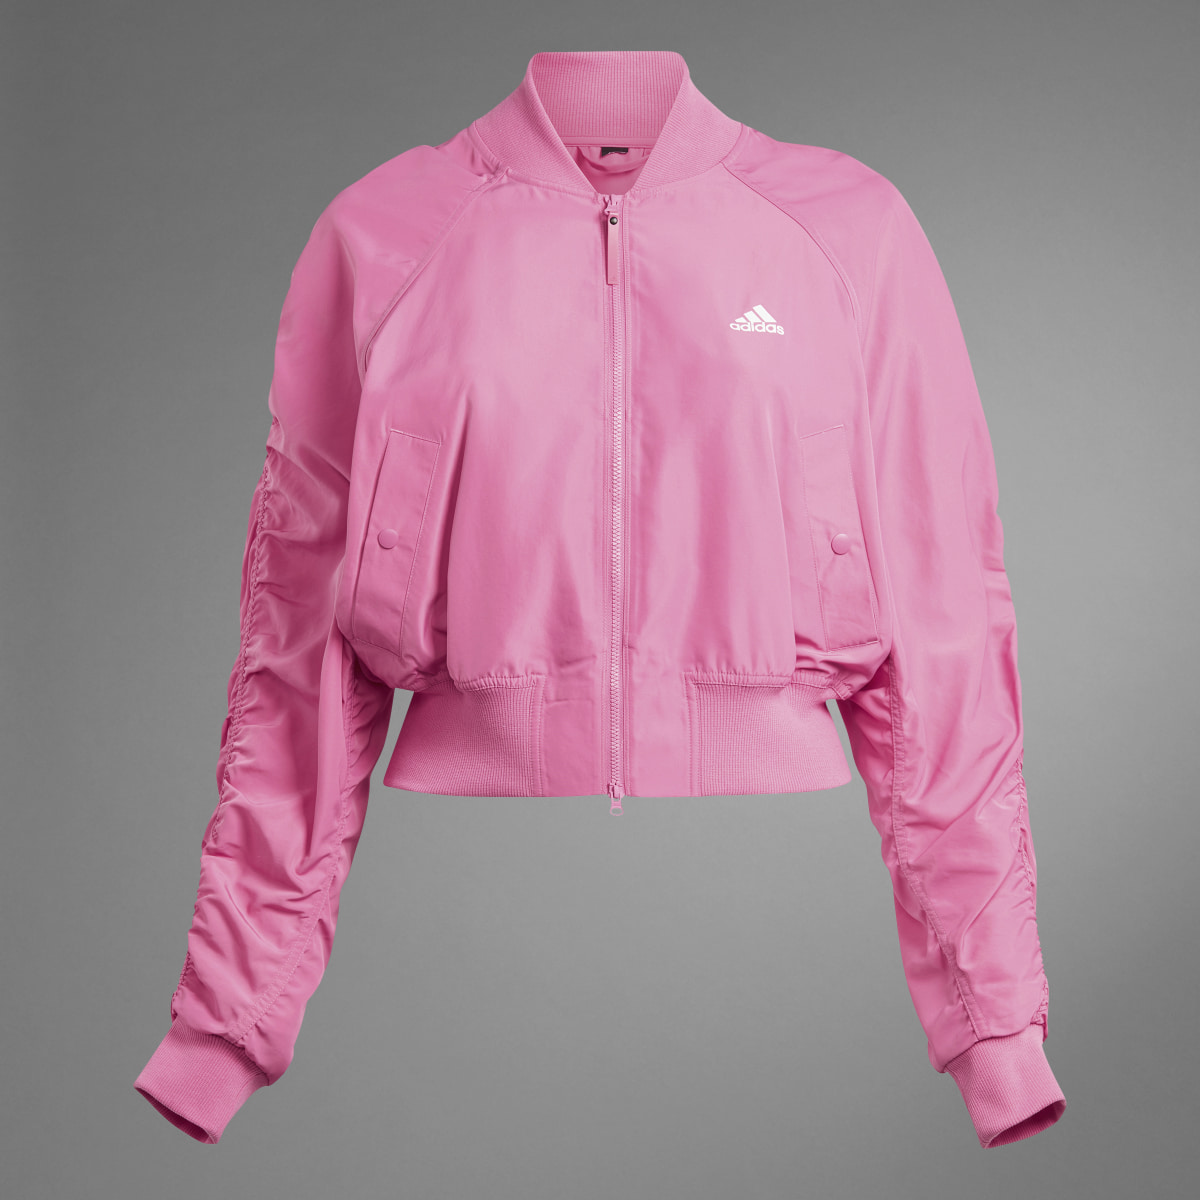 Adidas Collective Power Bomber Jacket (Plus Size). 10